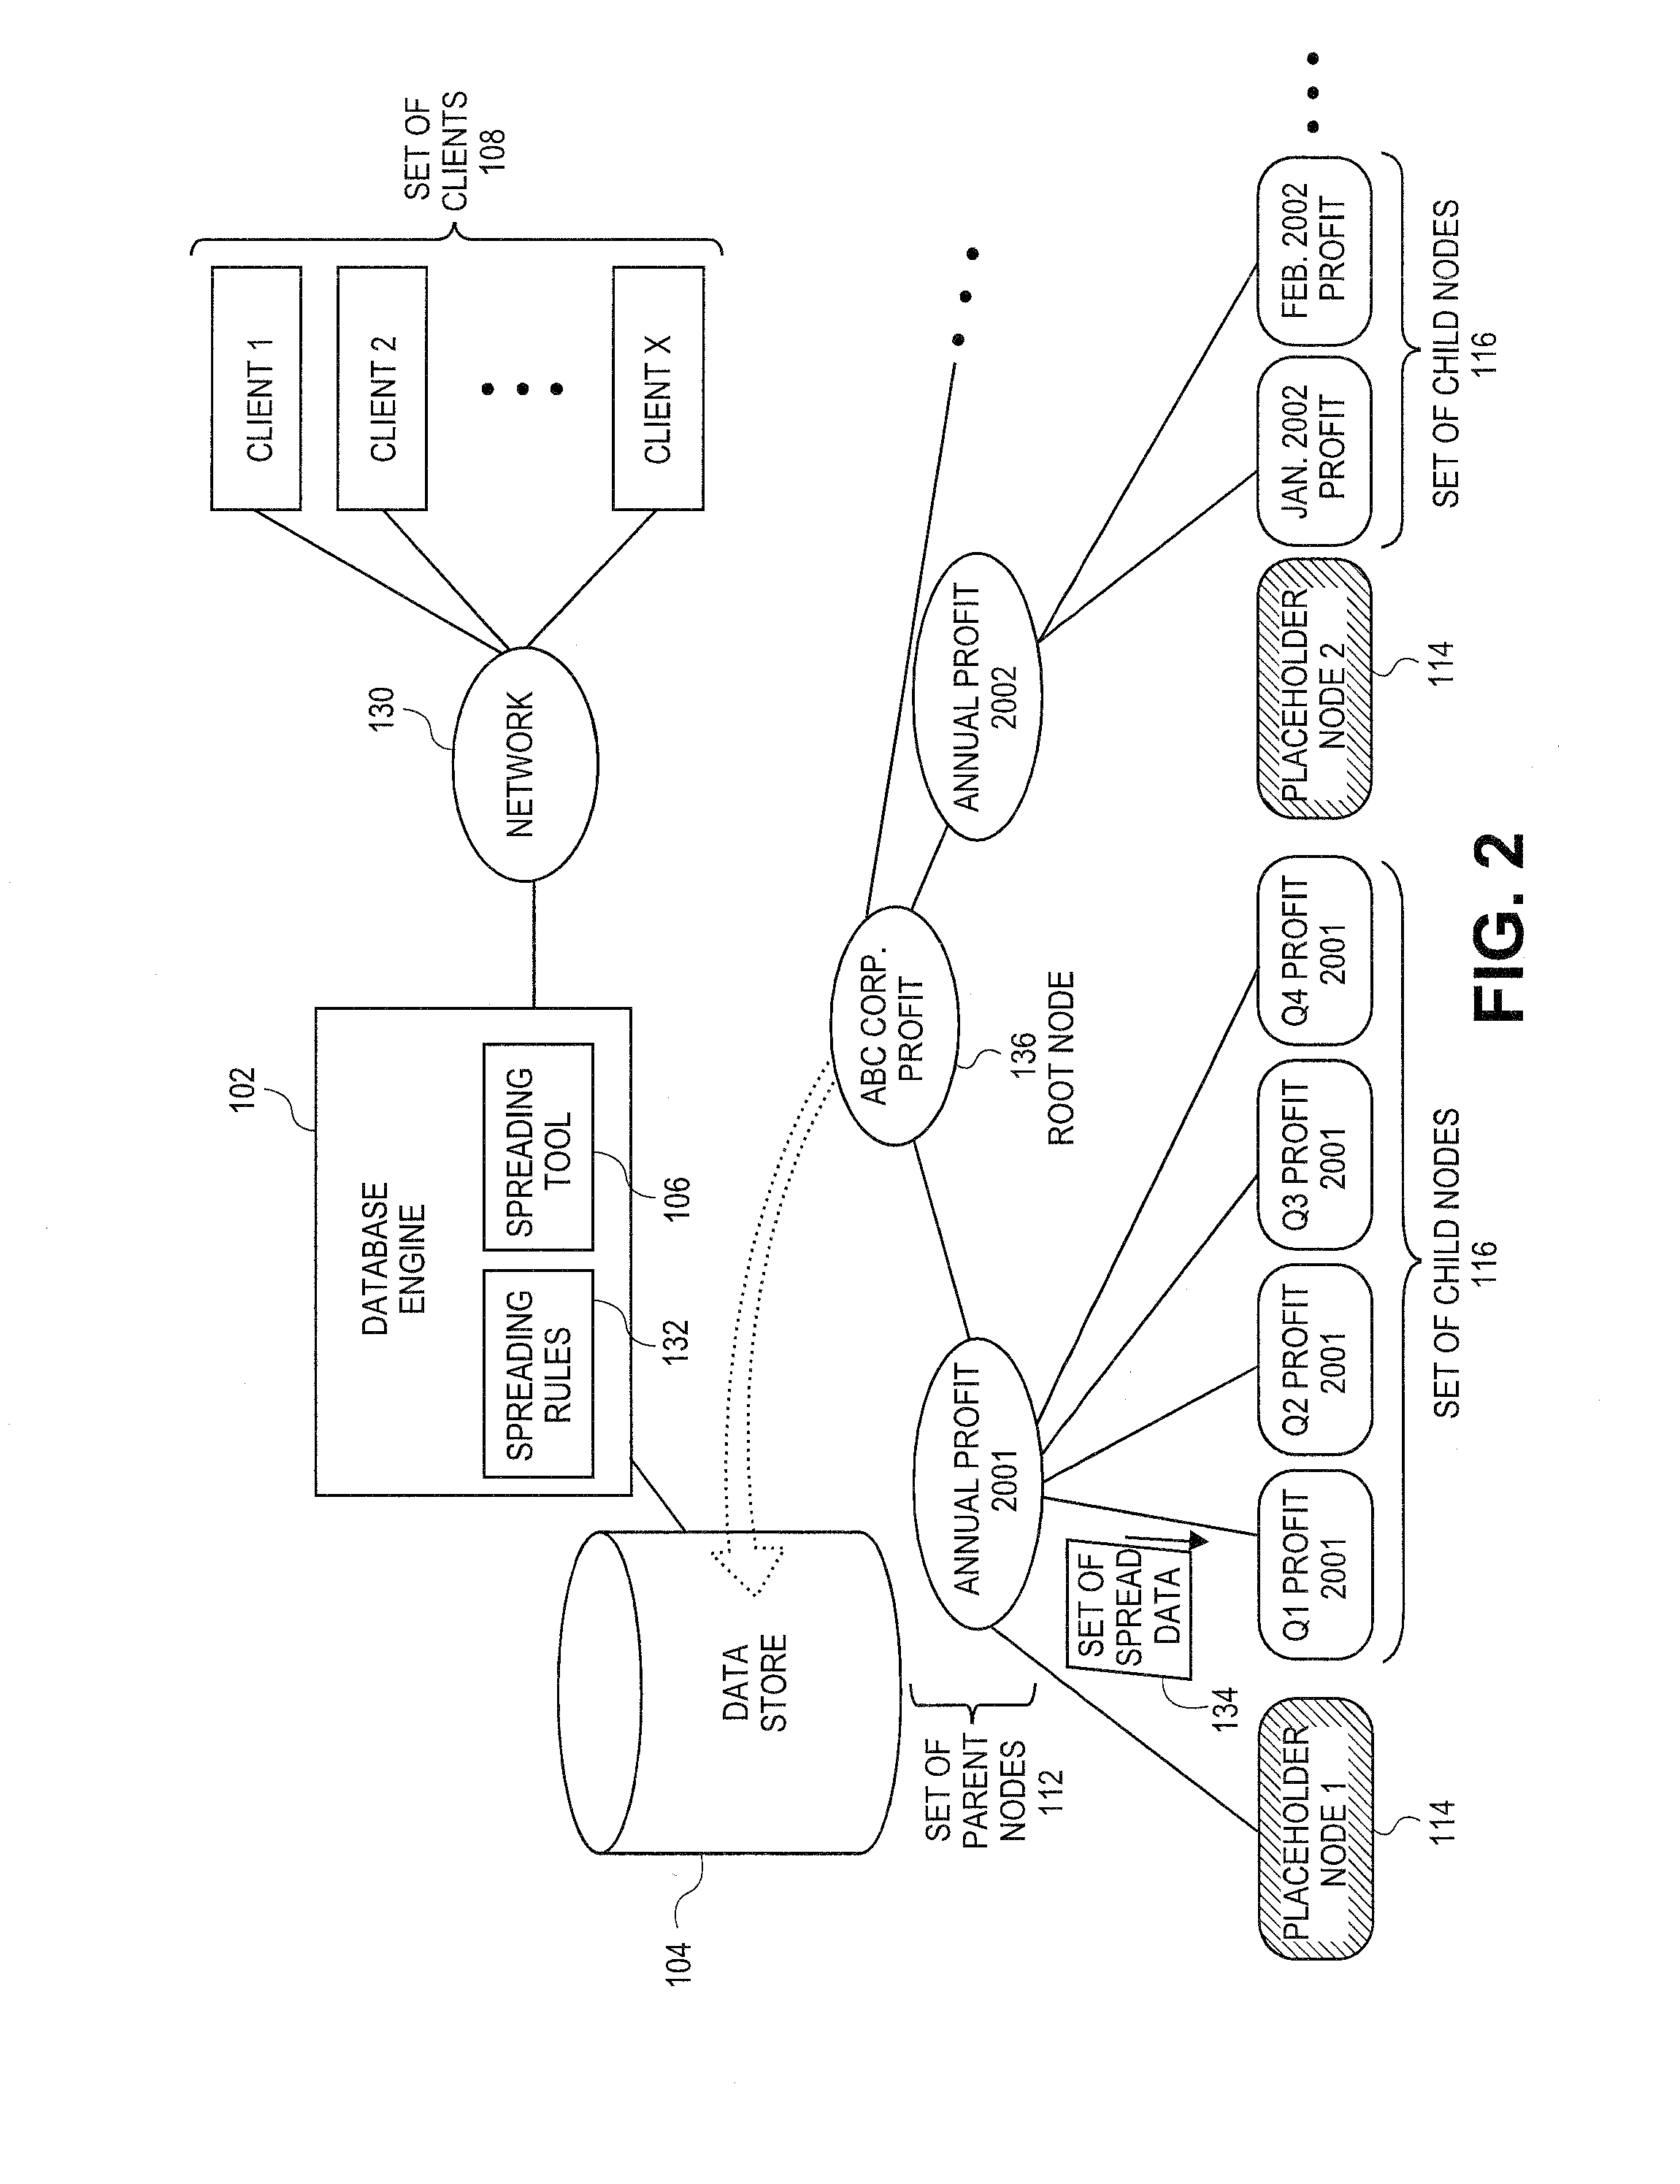 Systems and methods for conditioning the distribution of data in a hierarchical database